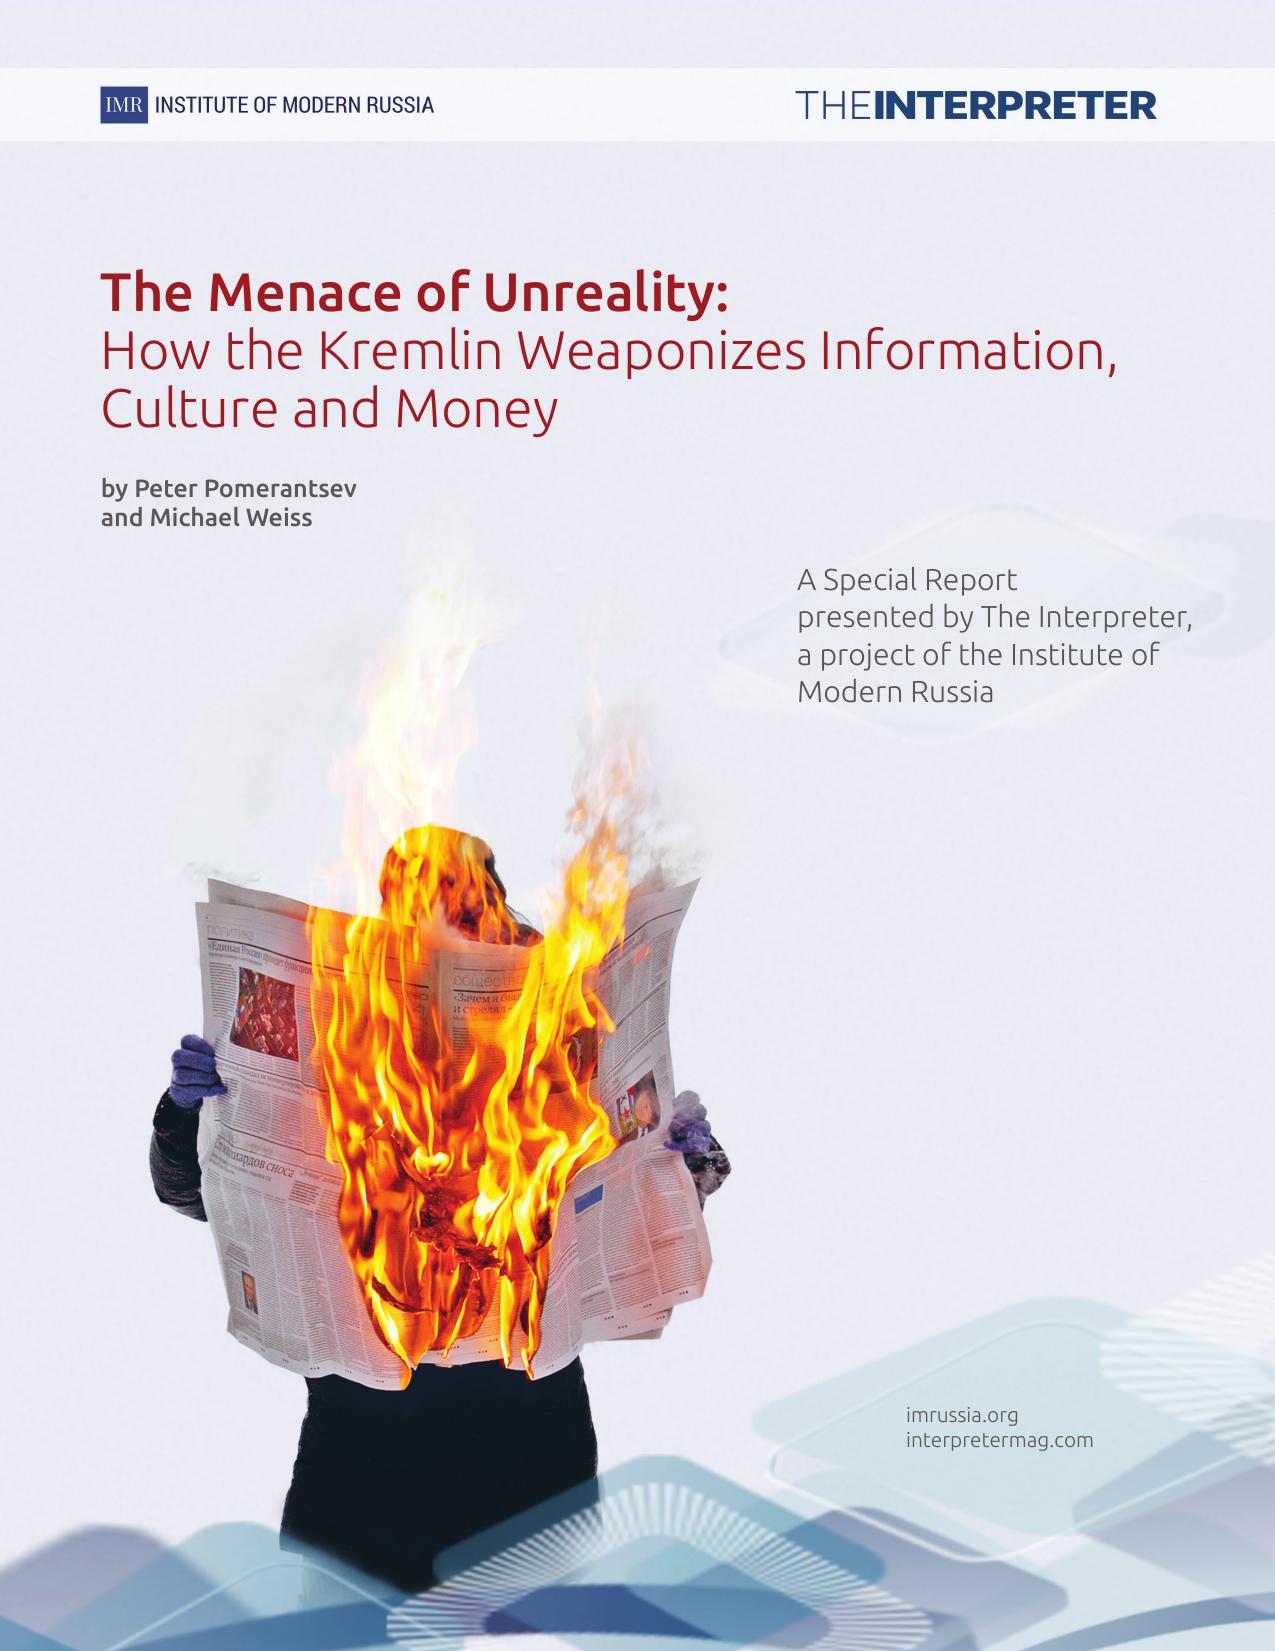 The Menace of Unreality- How the Kremlin Weaponizes Information, Culture and Money